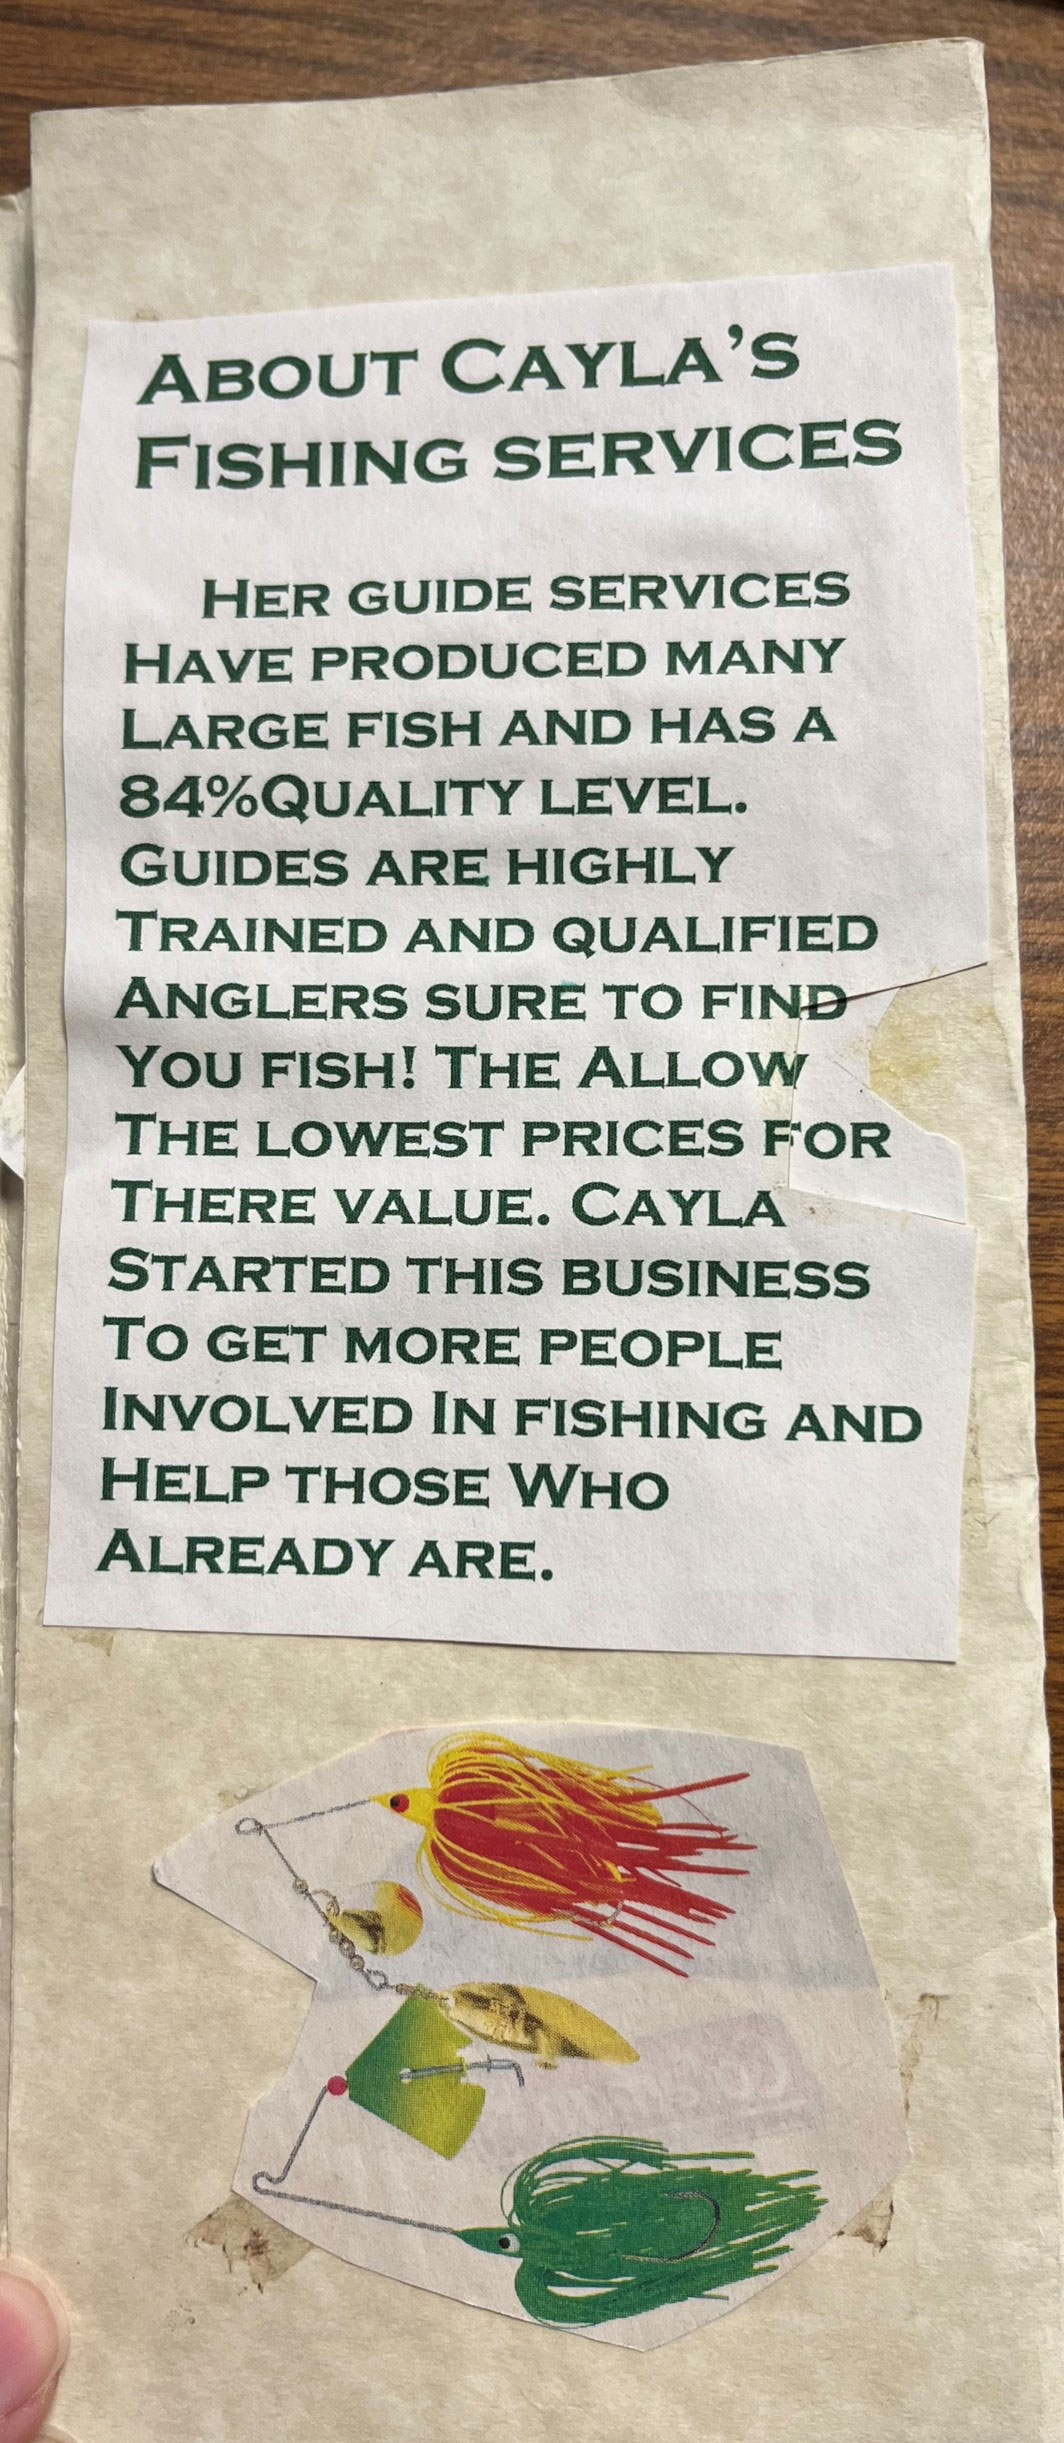 Cayla's Guide Service brochure - about